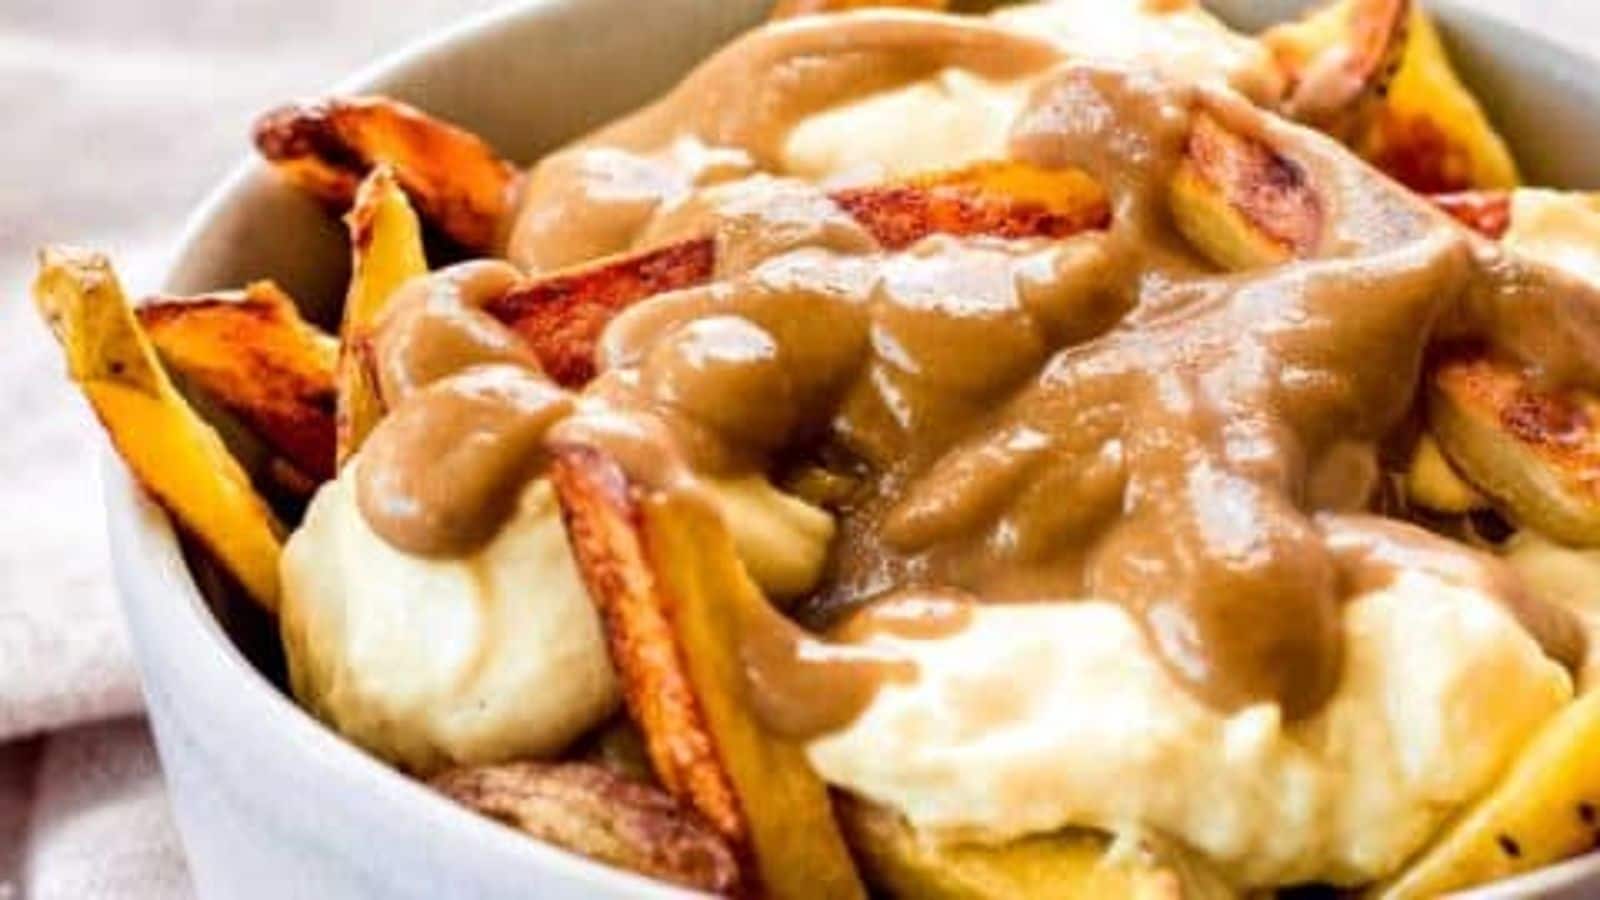 Recipe: Crafting Canadian poutine for those on a vegan lifestyle